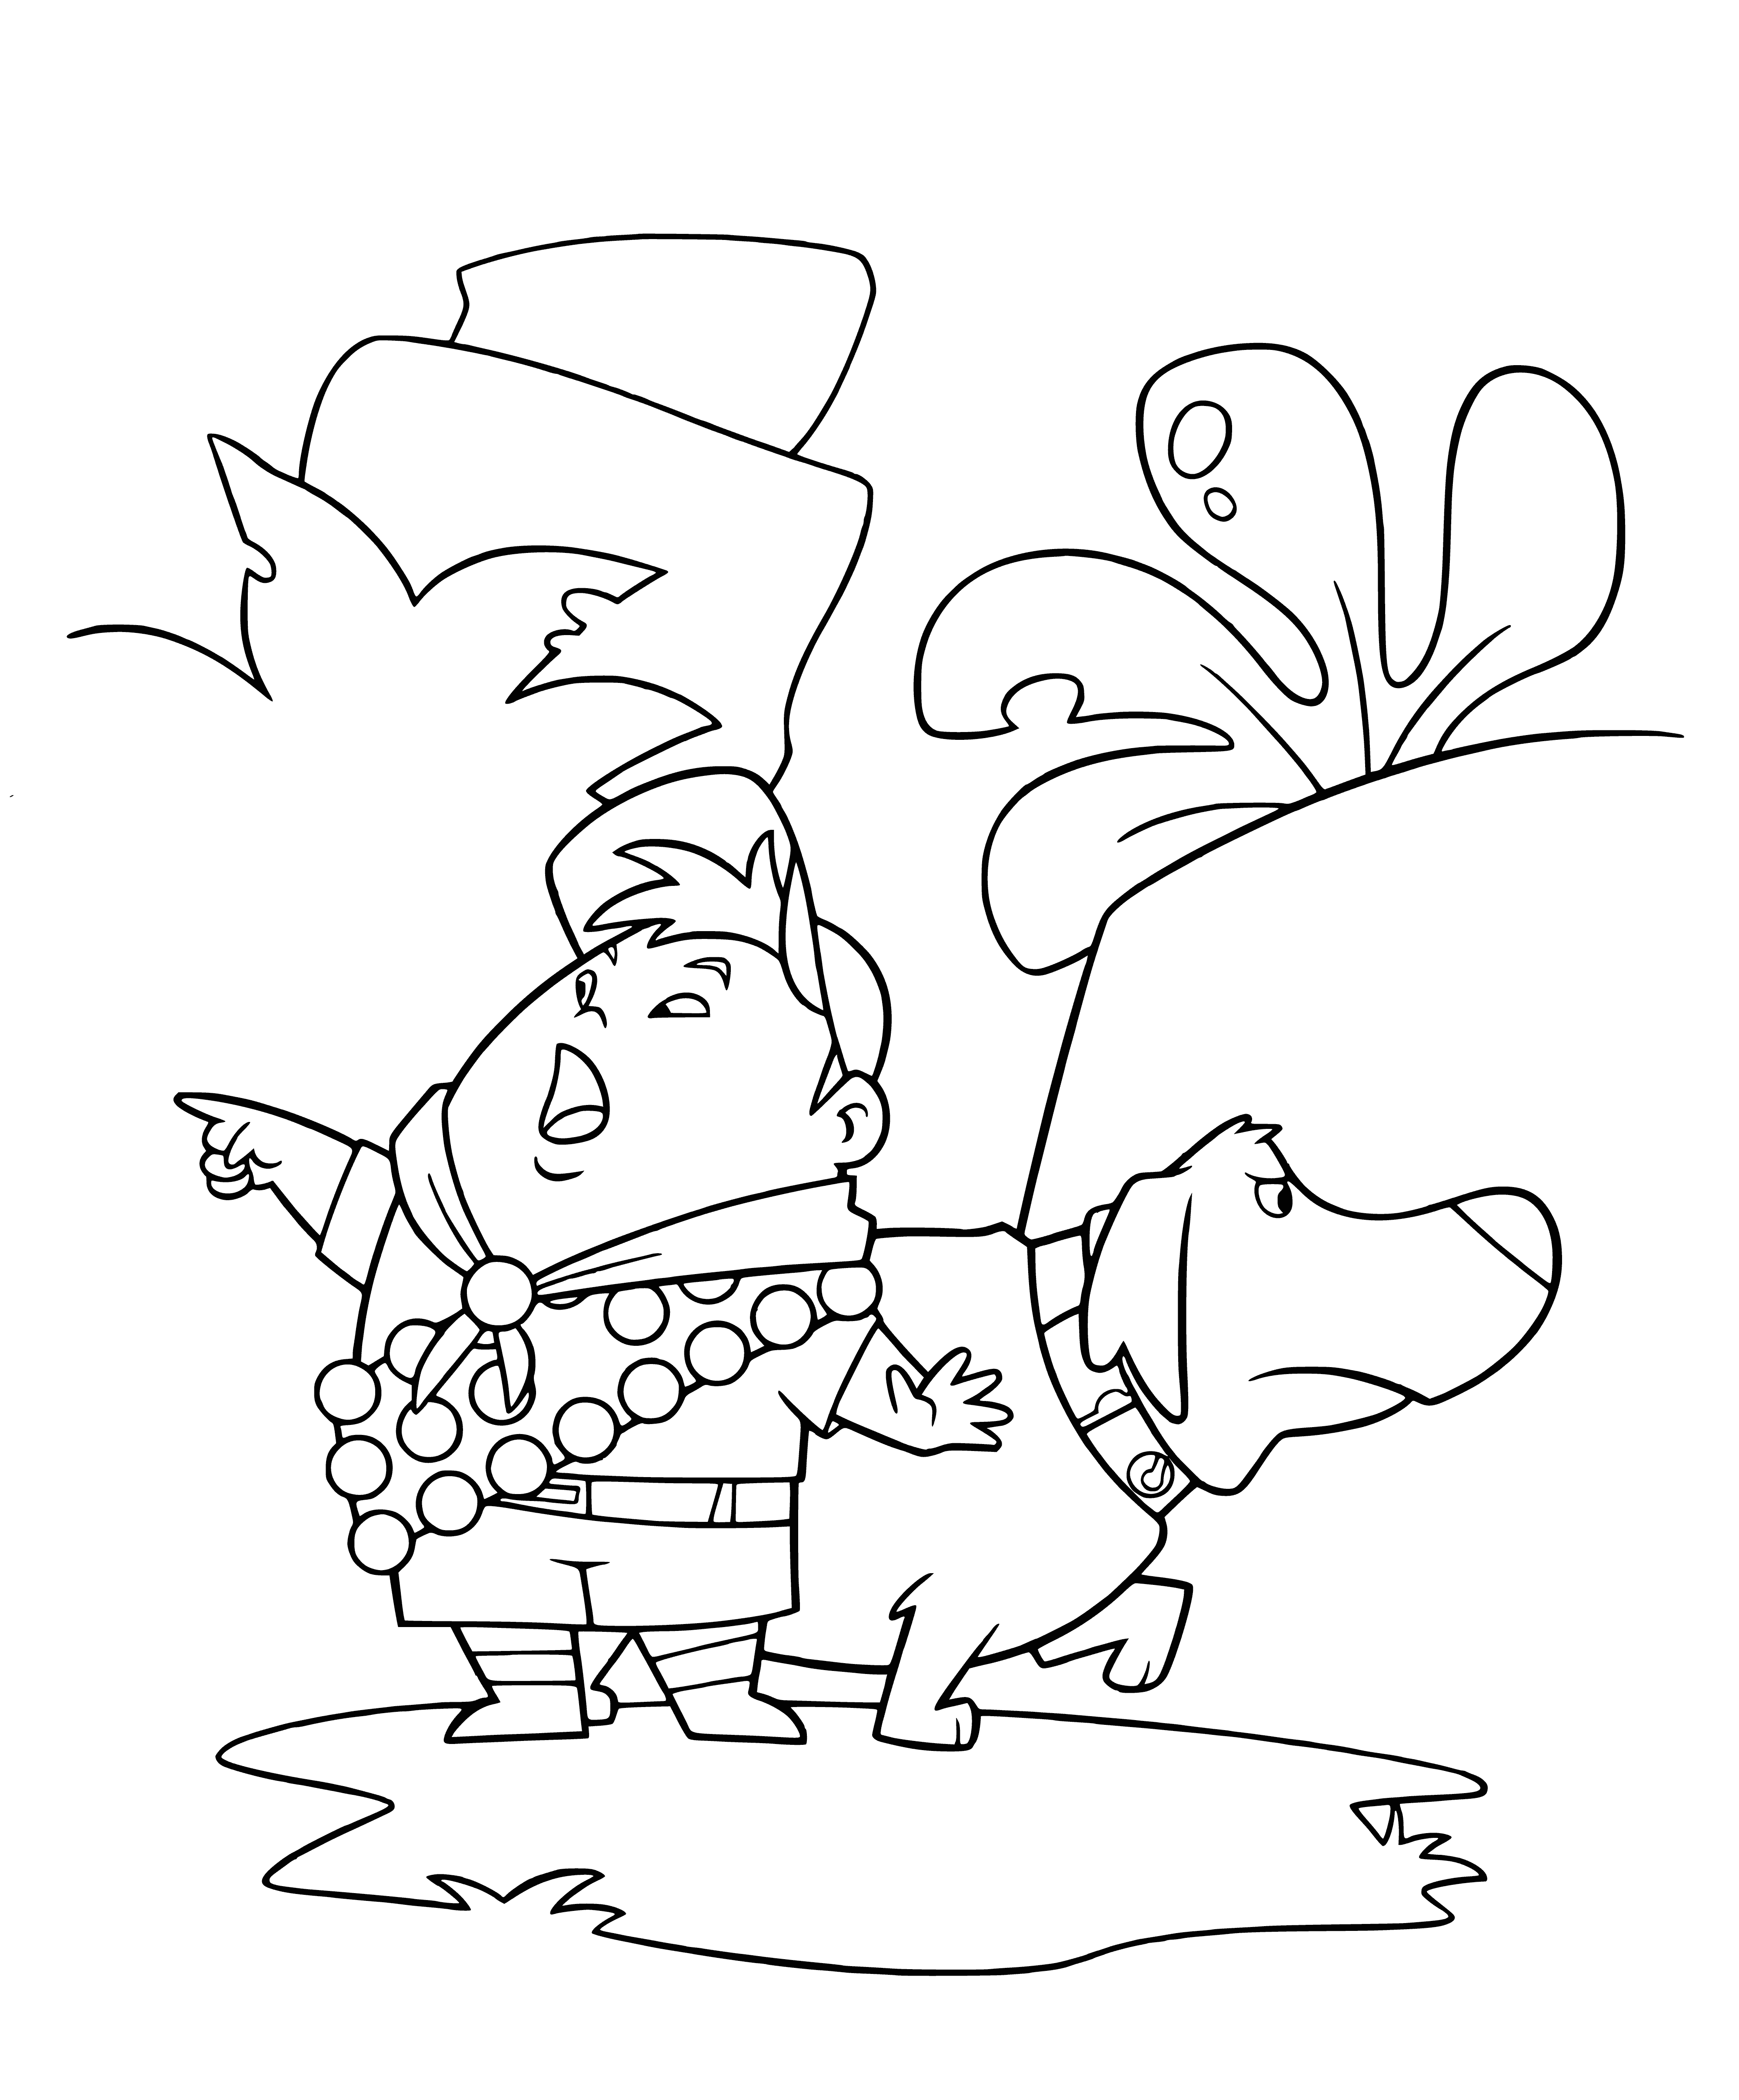 Russell and Doug coloring page